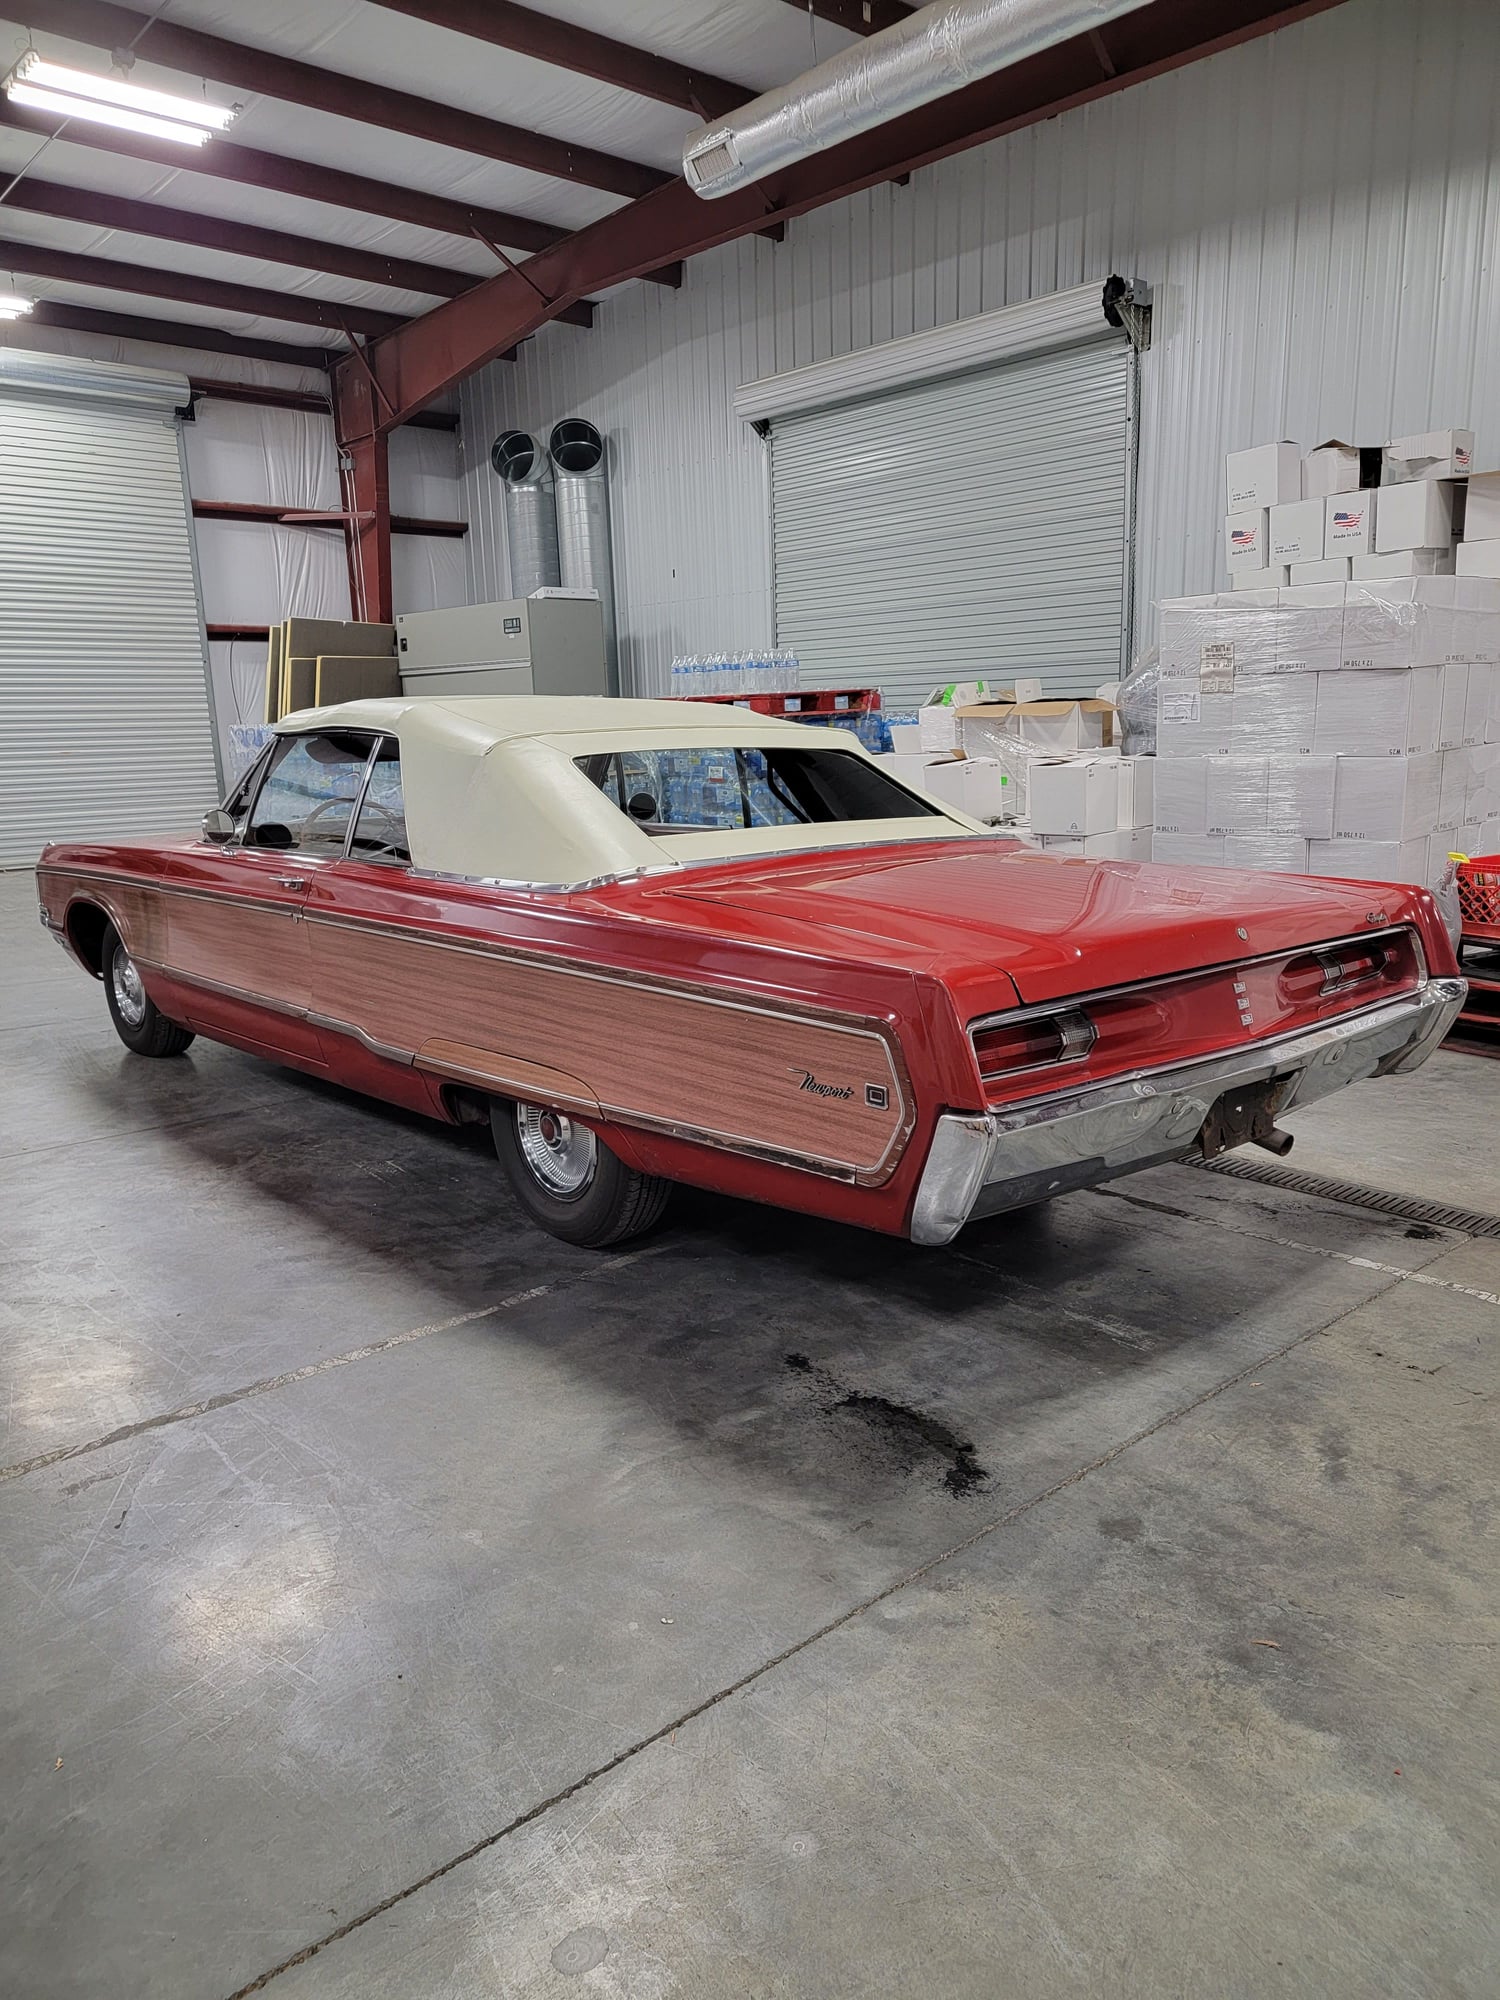 1970 Chrysler Newport - 1968 Chrysler Newport $17,500 - Used - VIN CE27G8C311241 - 47,000 Miles - 8 cyl - 2WD - Automatic - Convertible - Red - Greenfield, IN 46140, United States